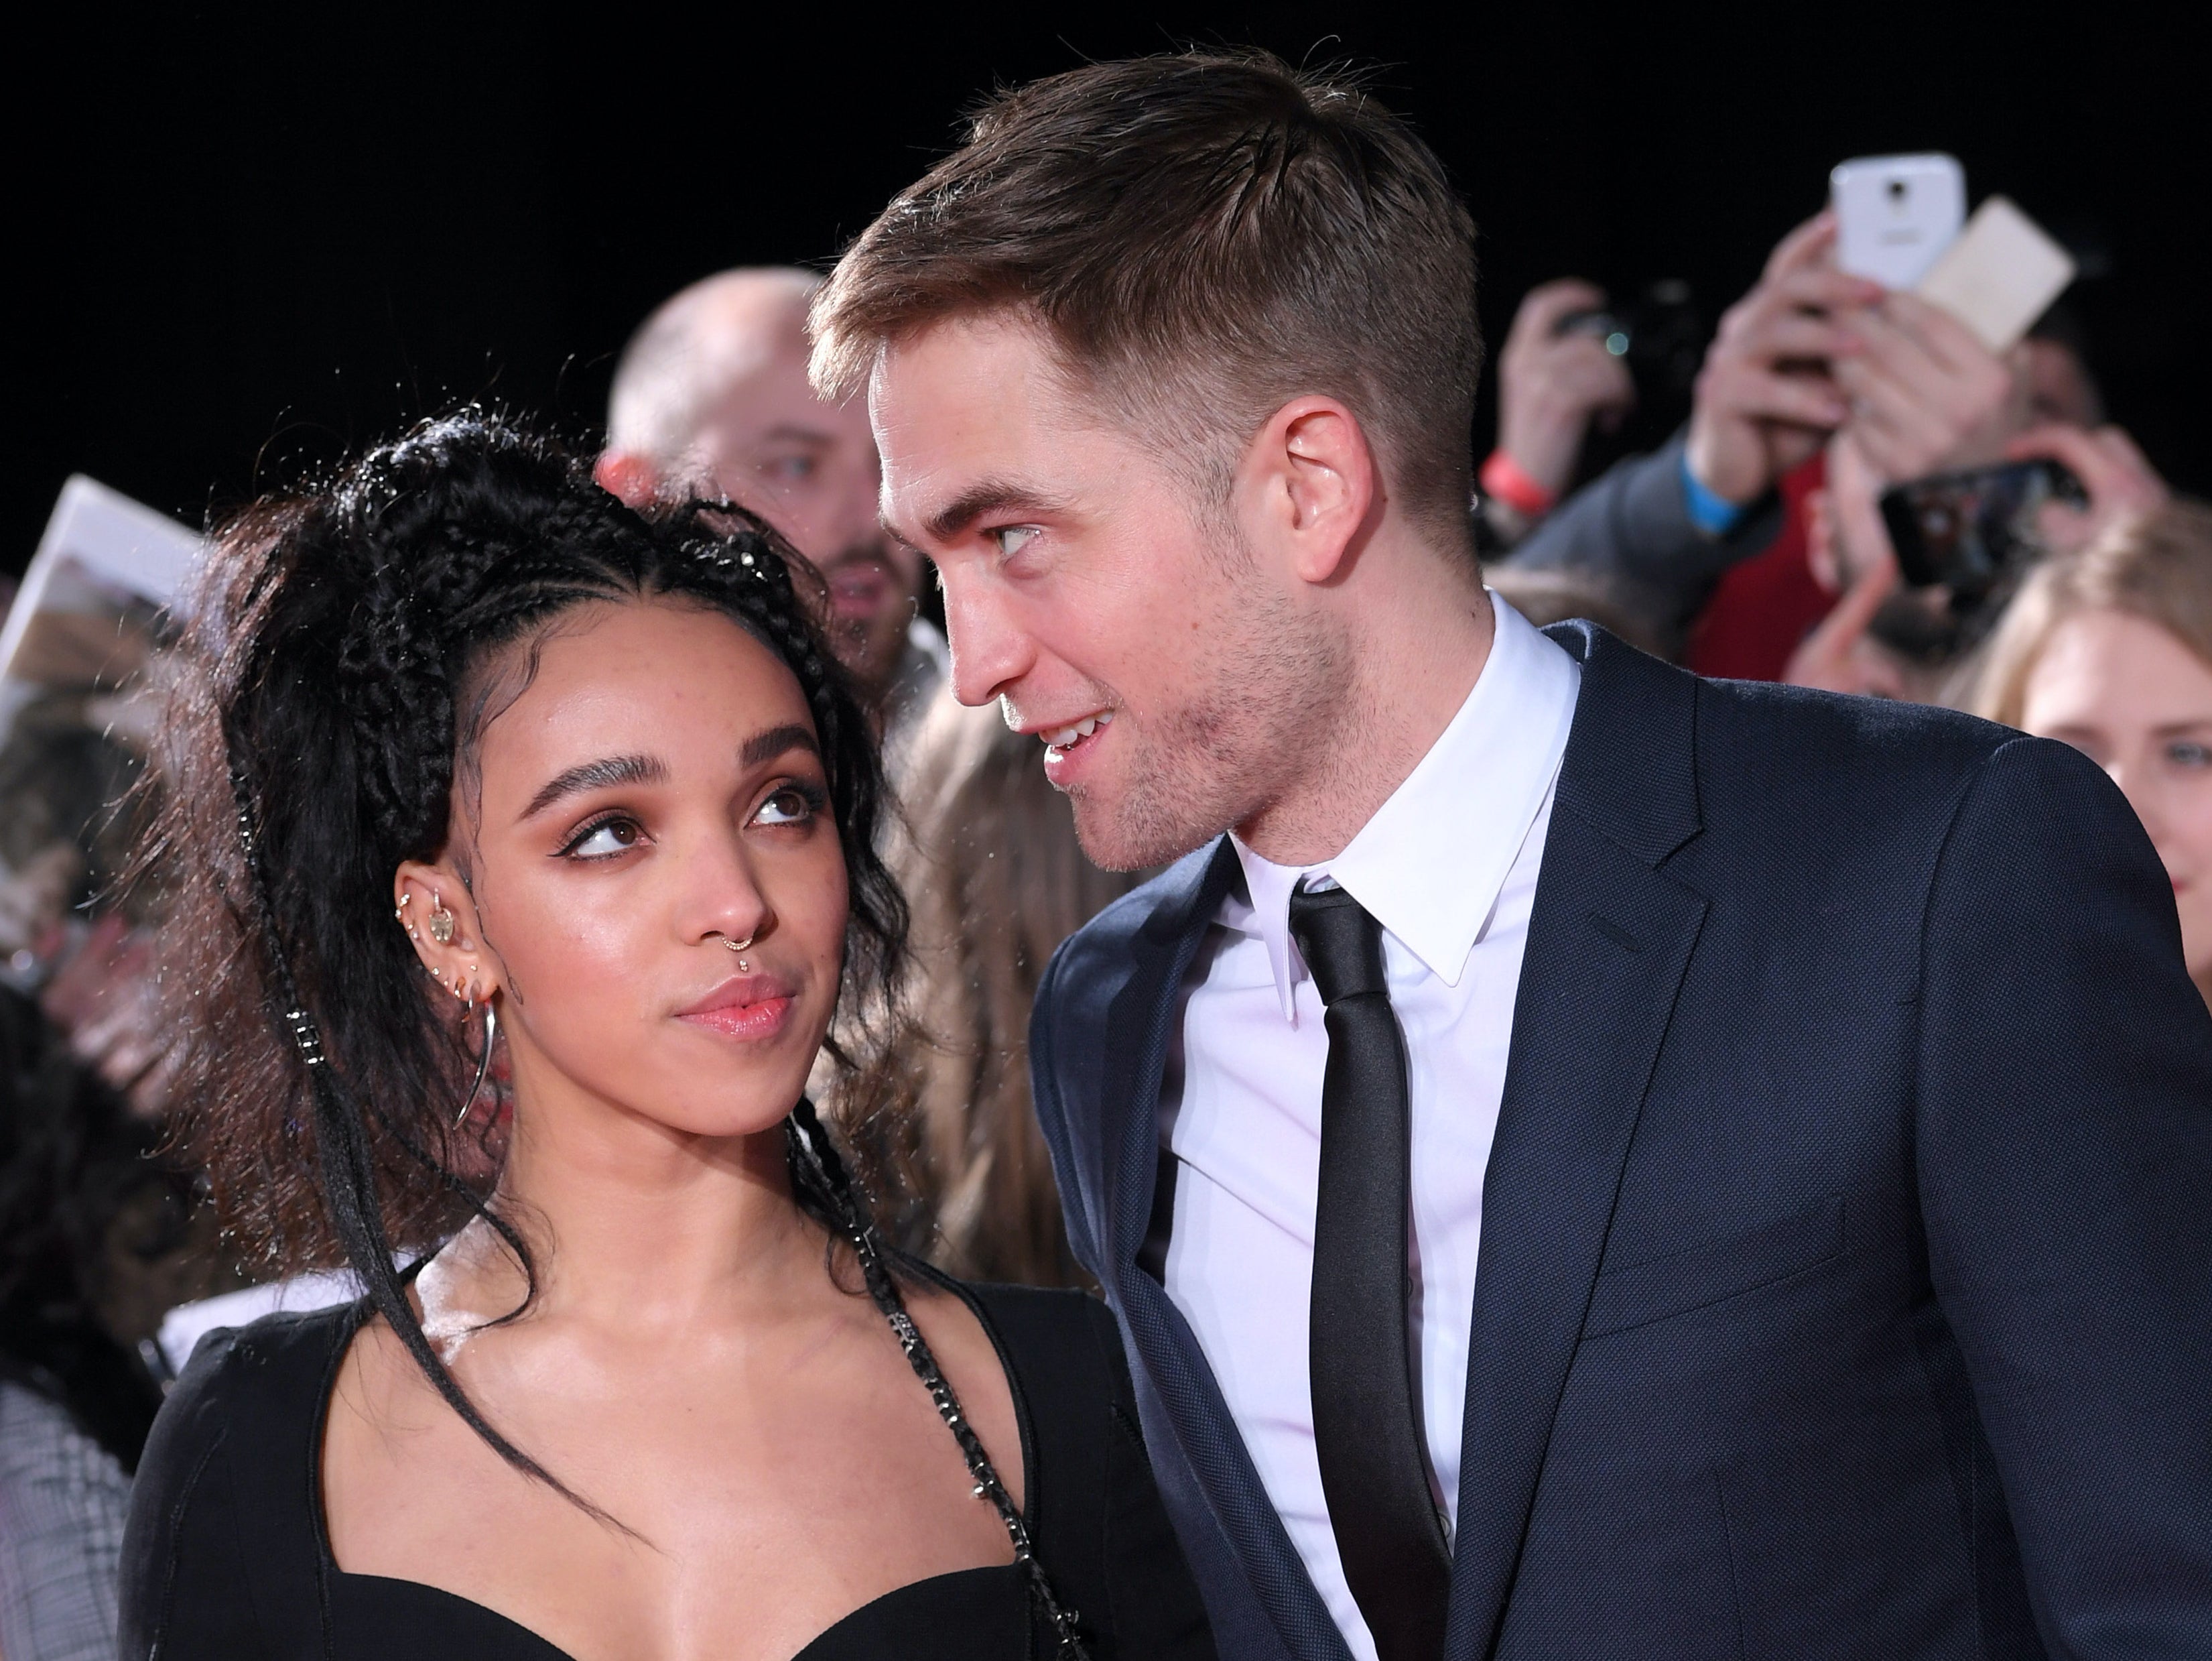 fka twigs dating whos dating who